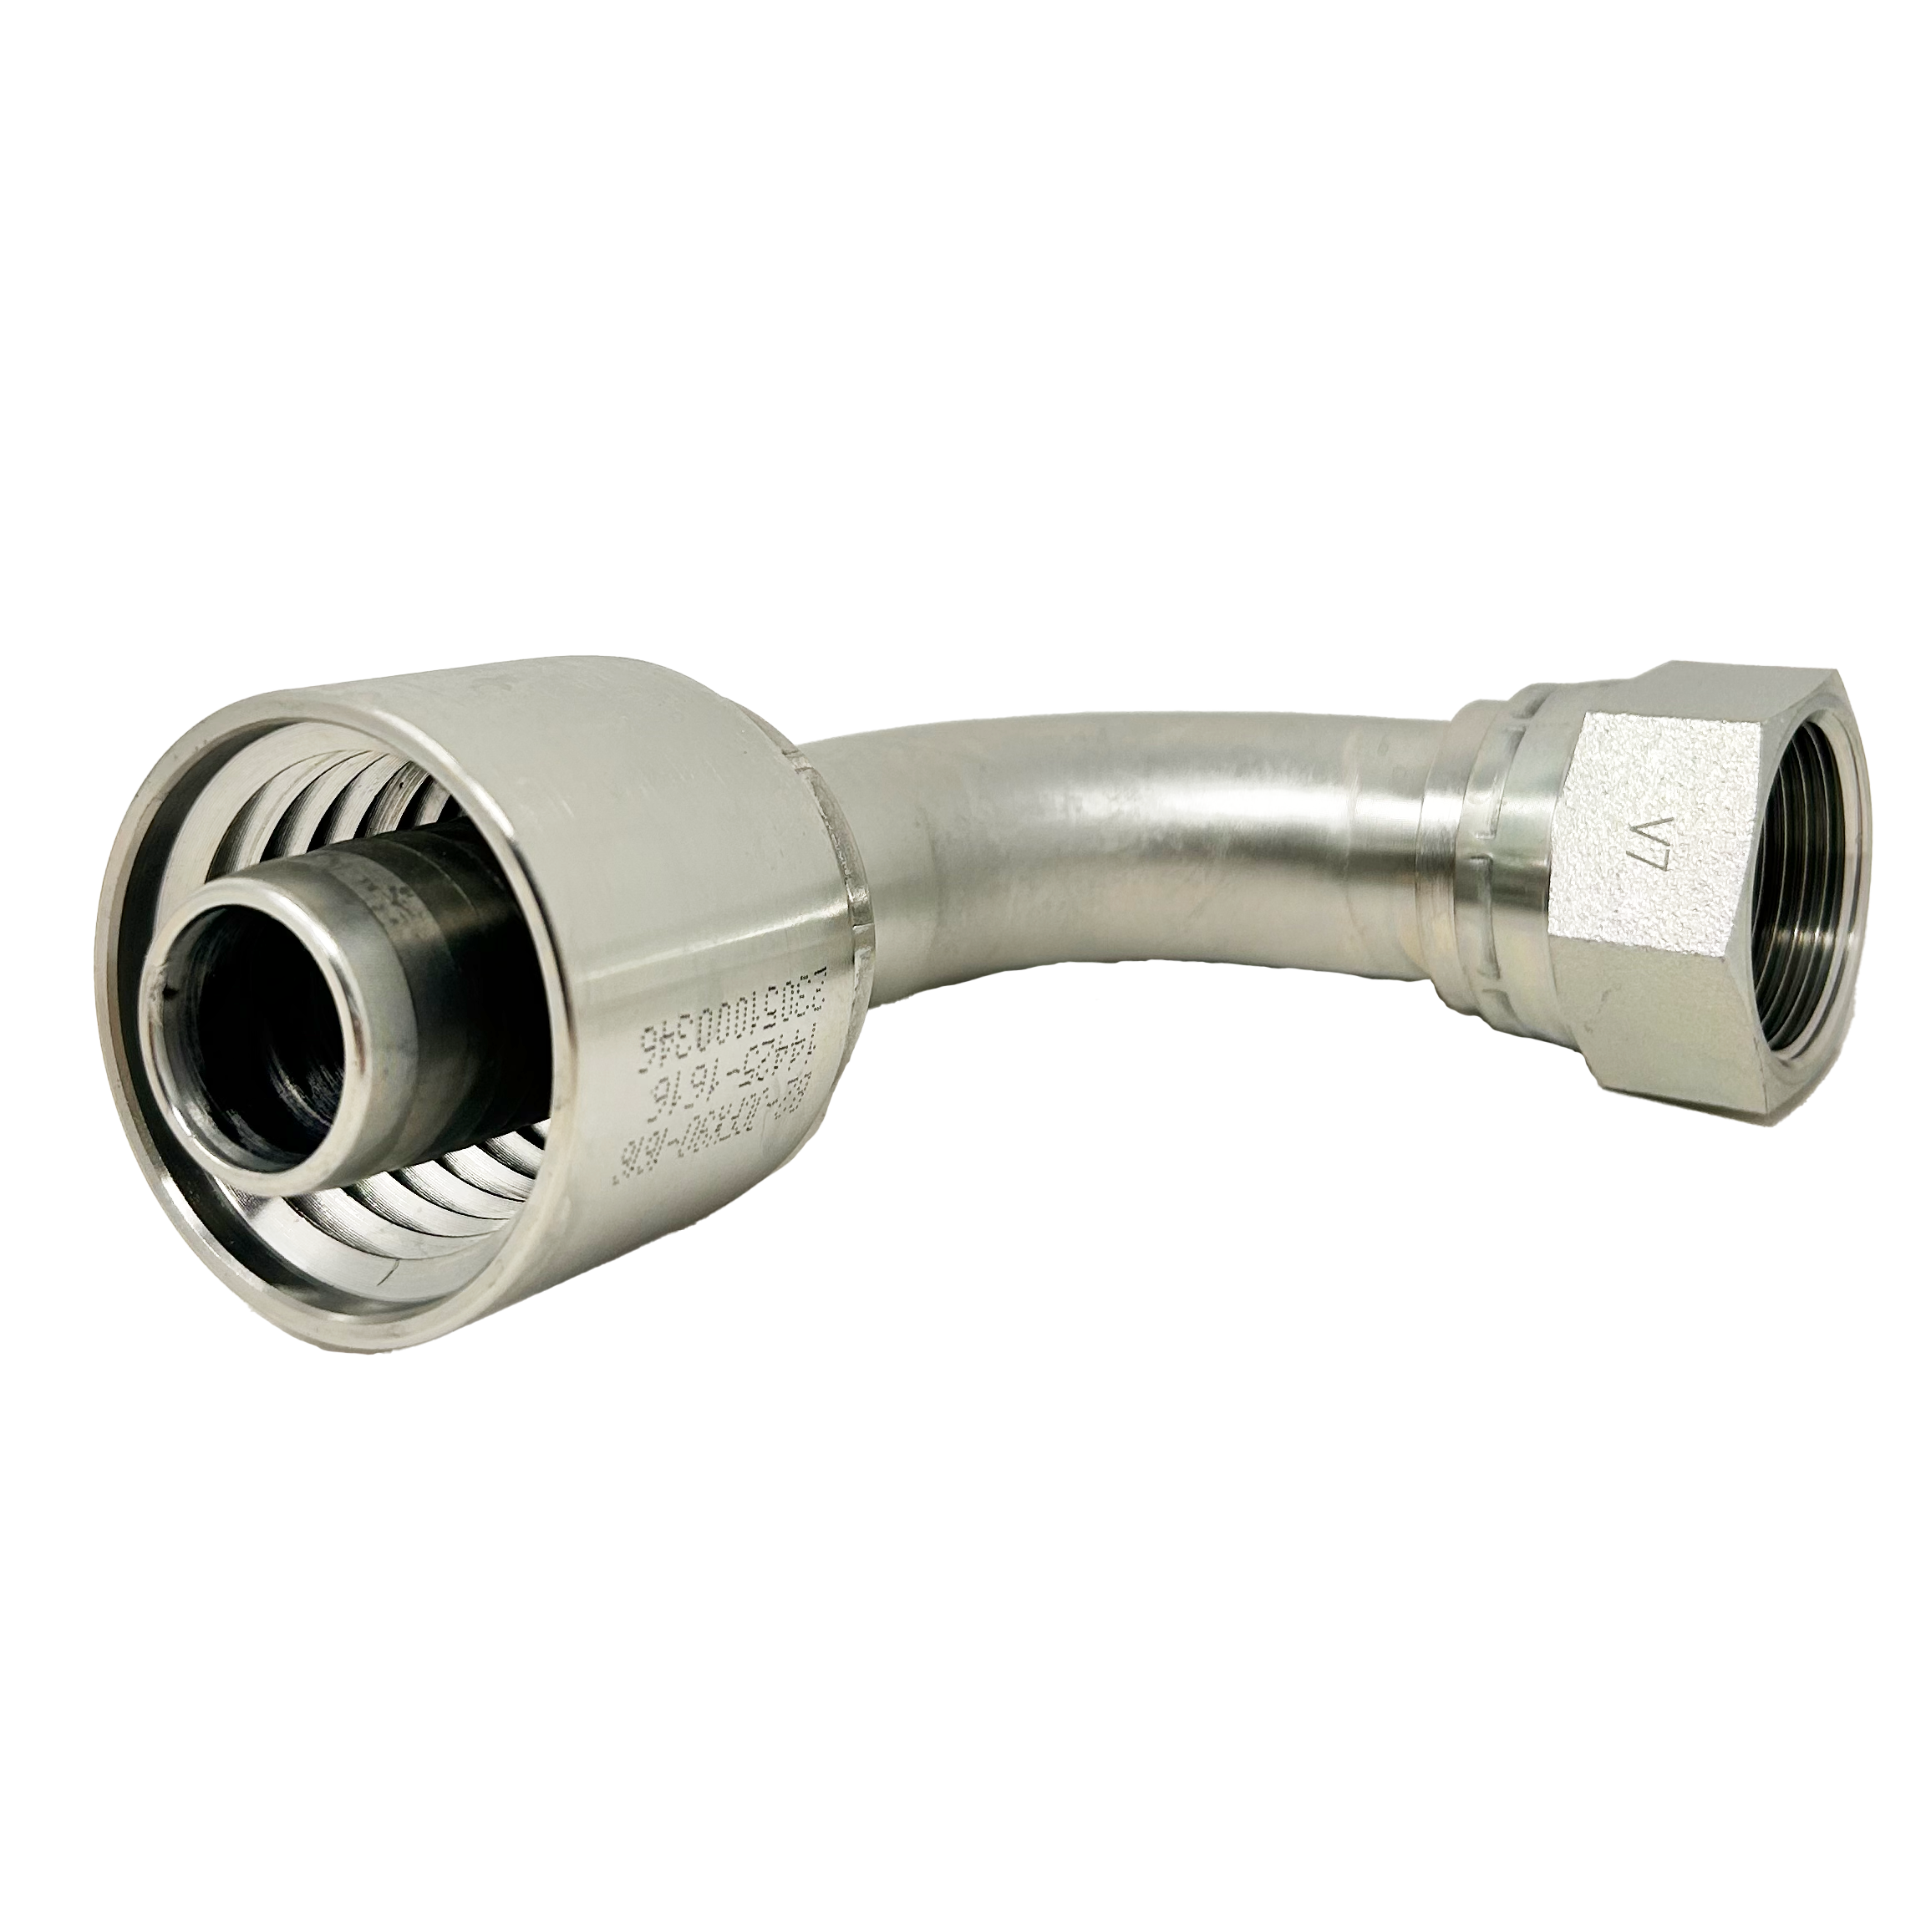 B2-JCFX90-0604: Continental Hose Fitting, 0.375 (3/8") Hose ID x 7/16-20 Female JIC, 90-Degree Swivel Connection